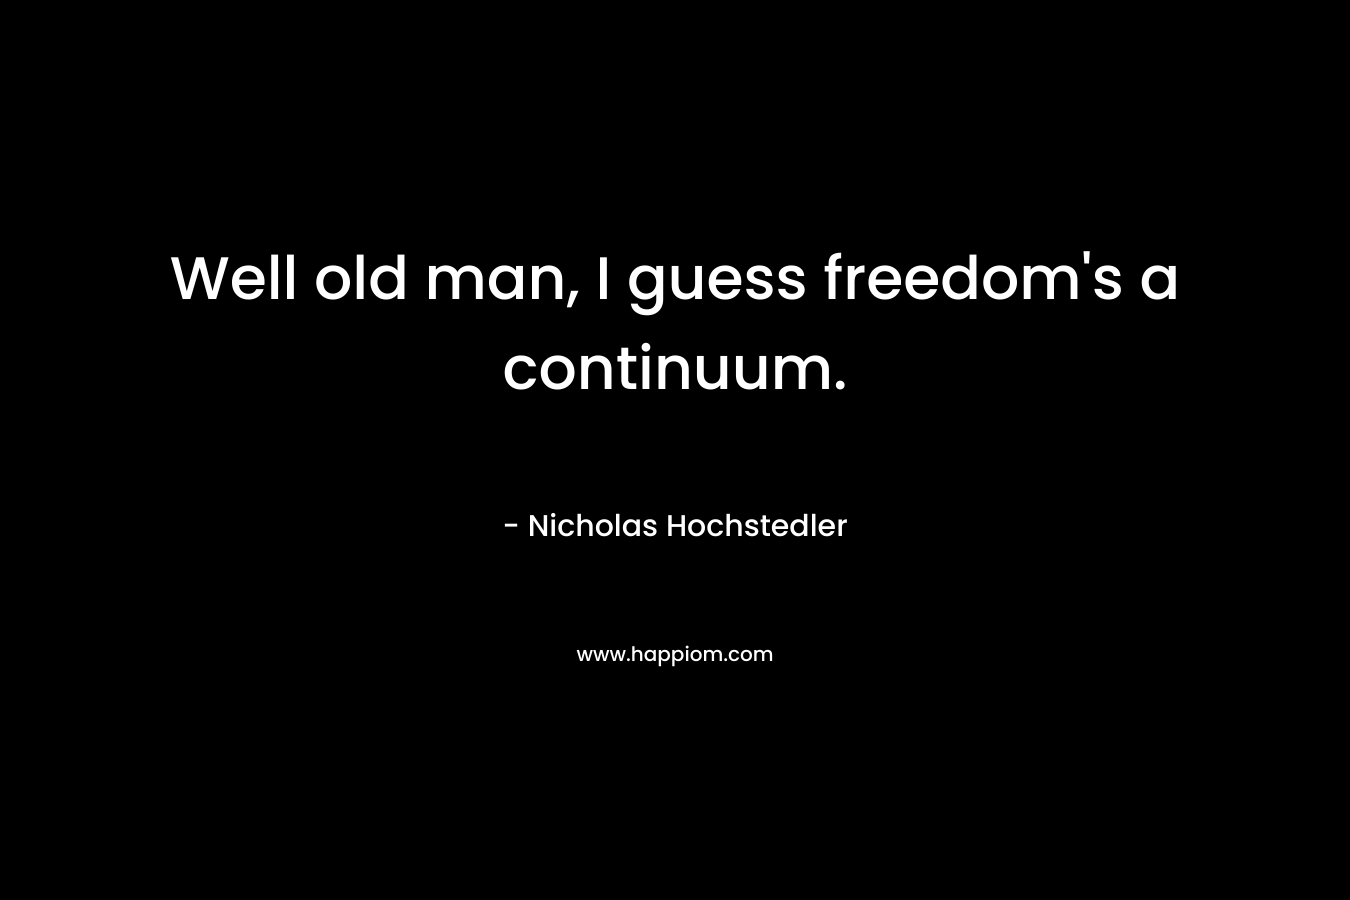 Well old man, I guess freedom’s a continuum. – Nicholas Hochstedler